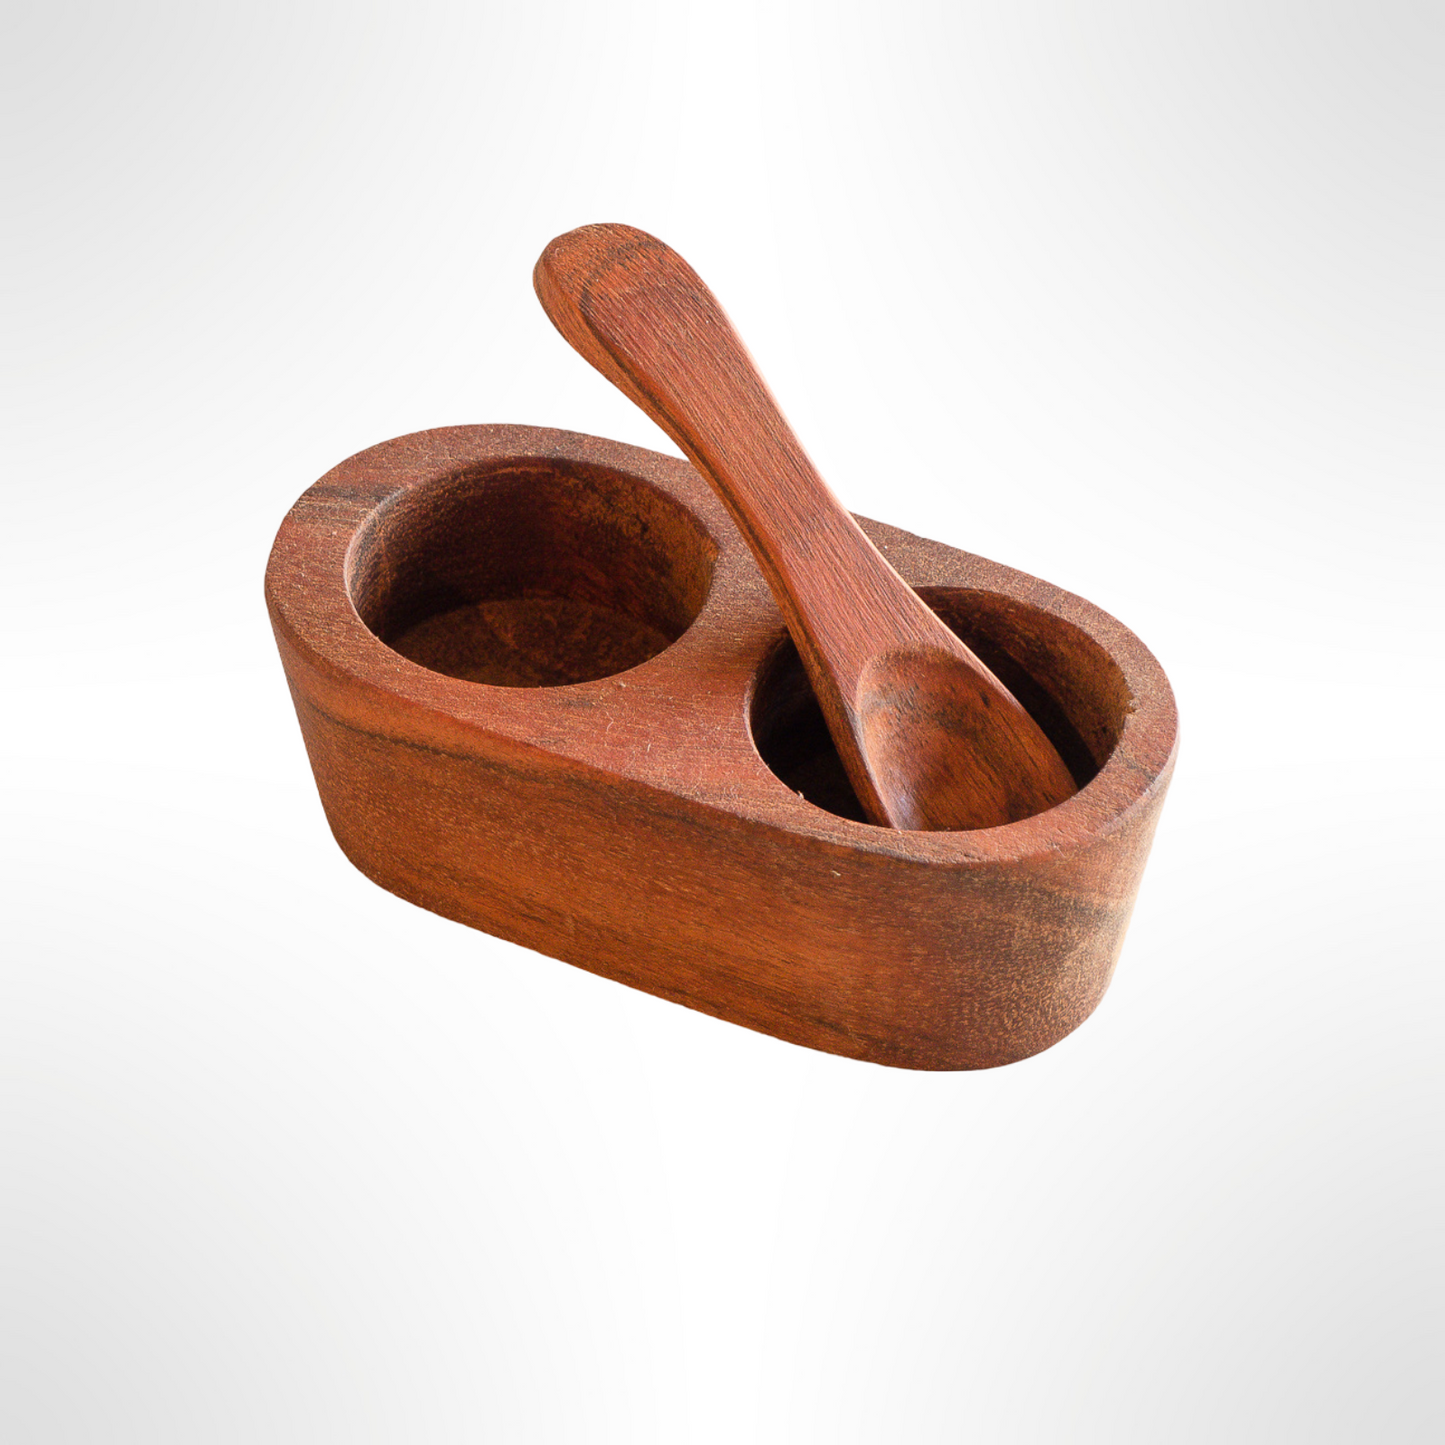 Salt & Pepper bowl with spoon